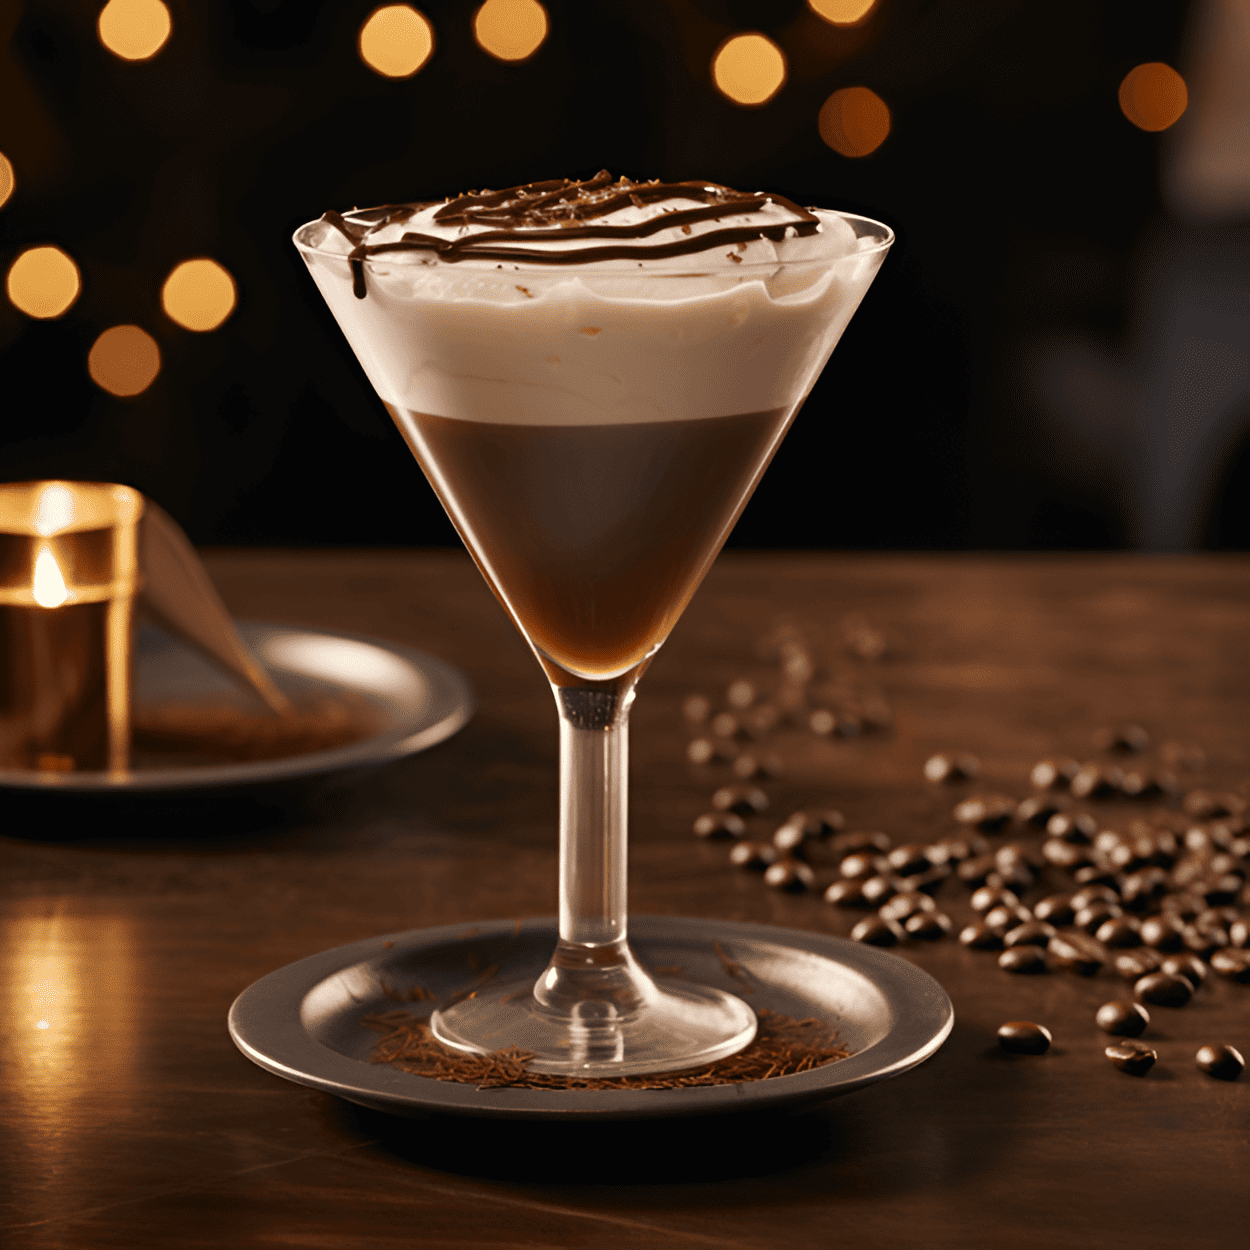 Frangelico Truffle Cocktail Recipe - The Frangelico Truffle has a sweet, creamy, and nutty taste. The combination of Frangelico and Baileys gives it a rich, dessert-like flavor that is both indulgent and satisfying.